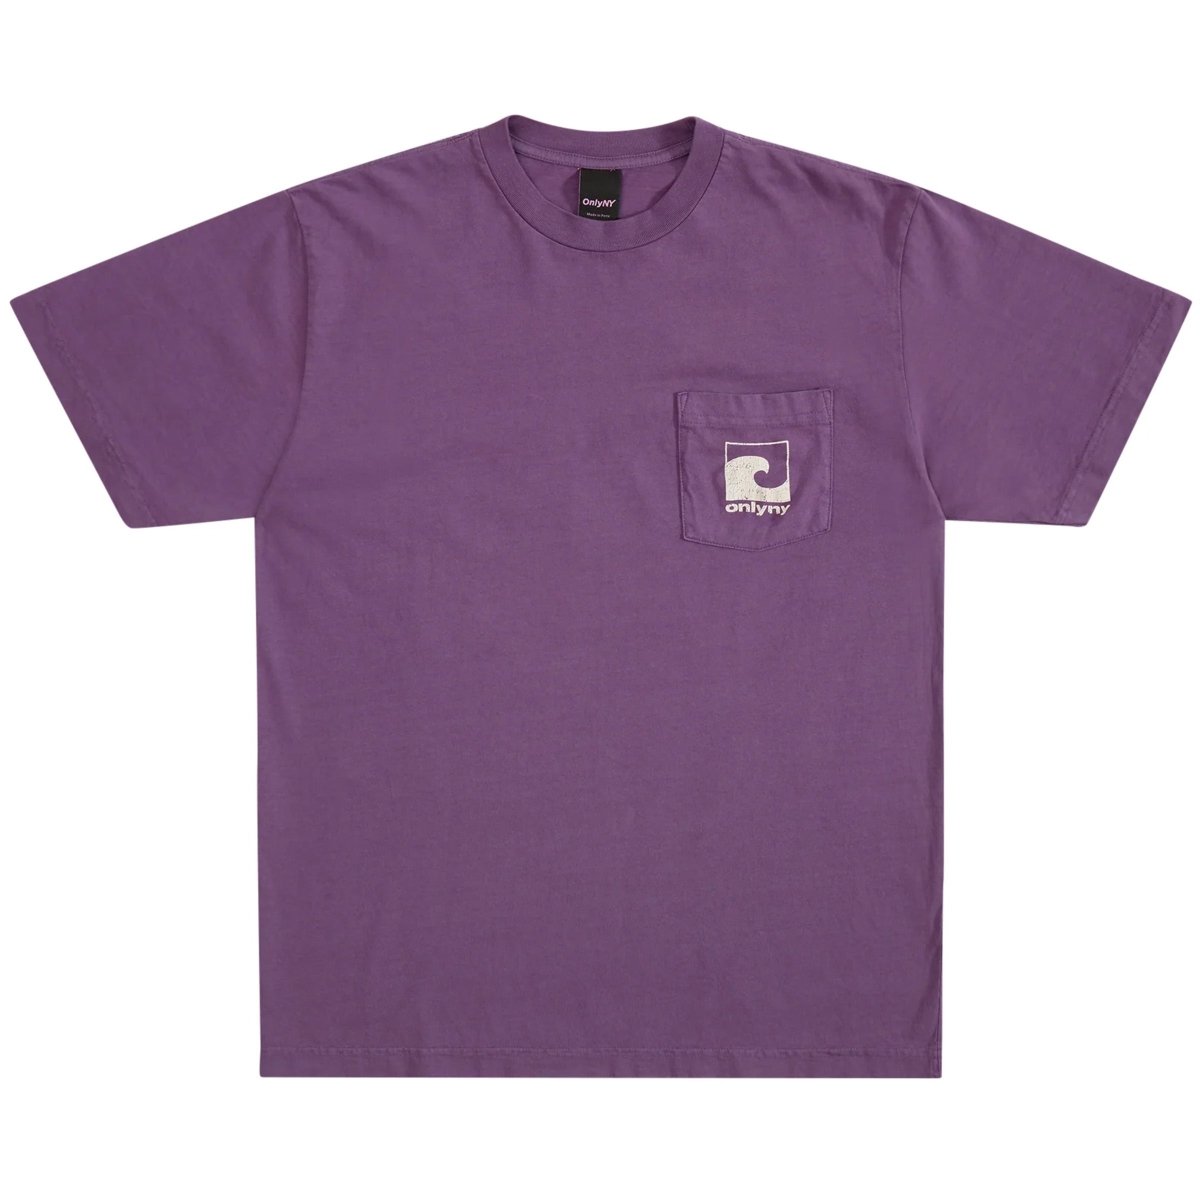 Only NY Riptide Pocket Tee Shirt Purple - 10032650 - West NYC